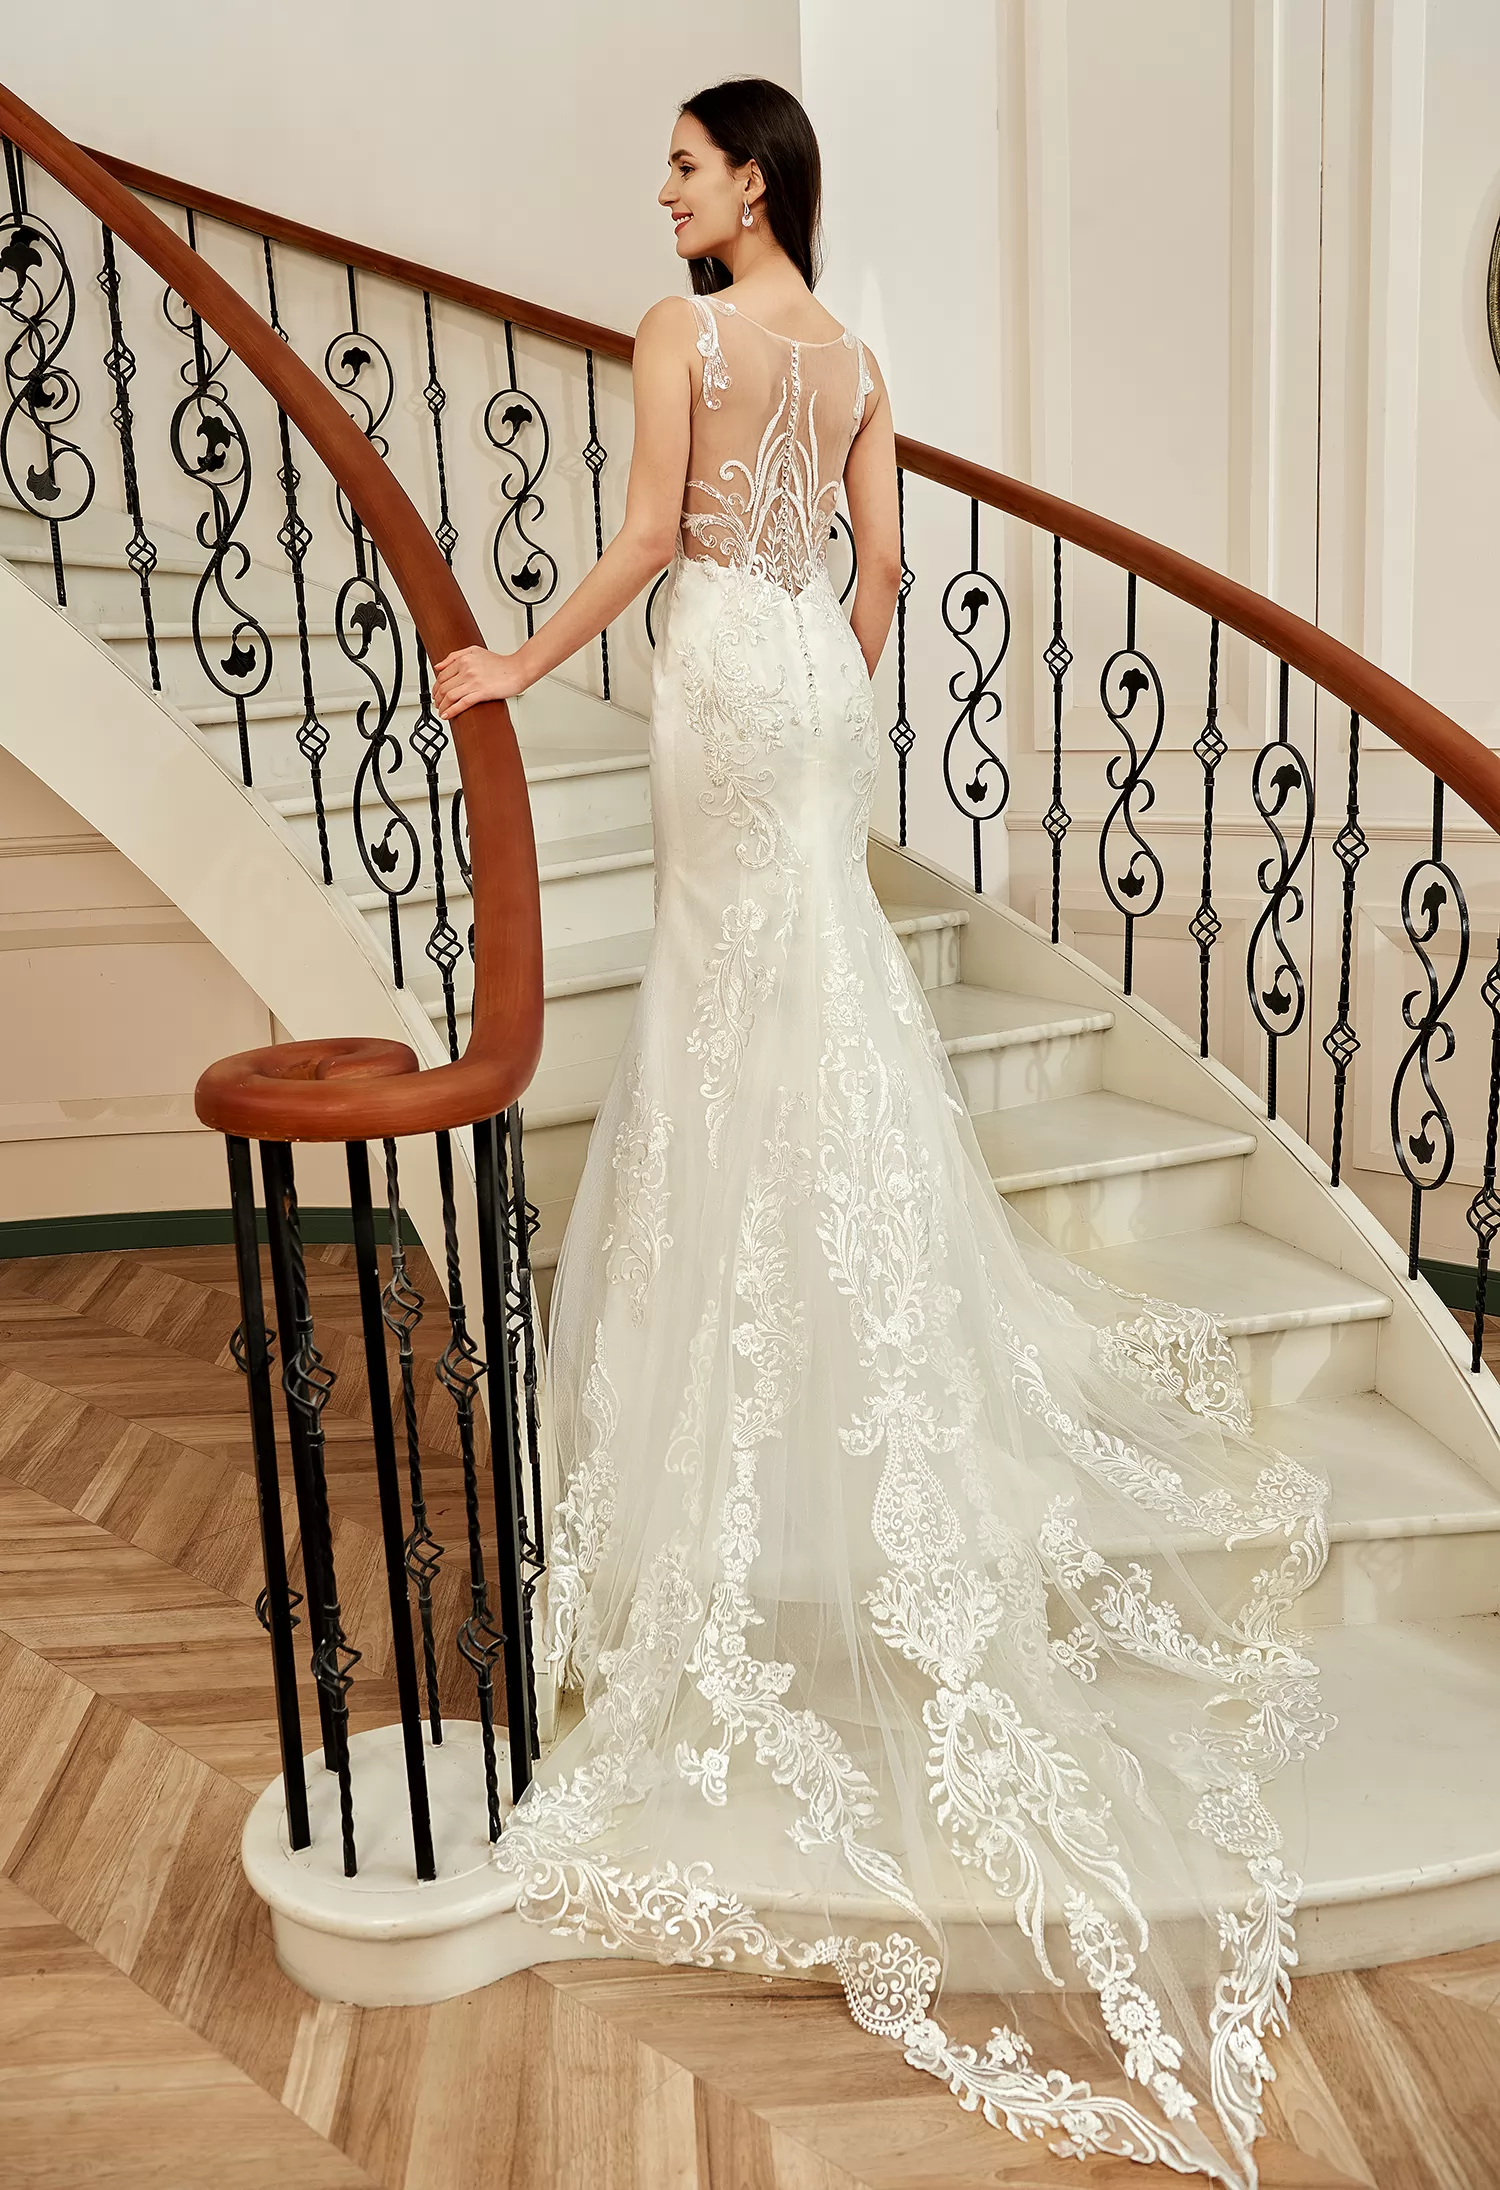 Sequin Beaded Illusion Back Wedding Dress With Long Lace Tulle Trian